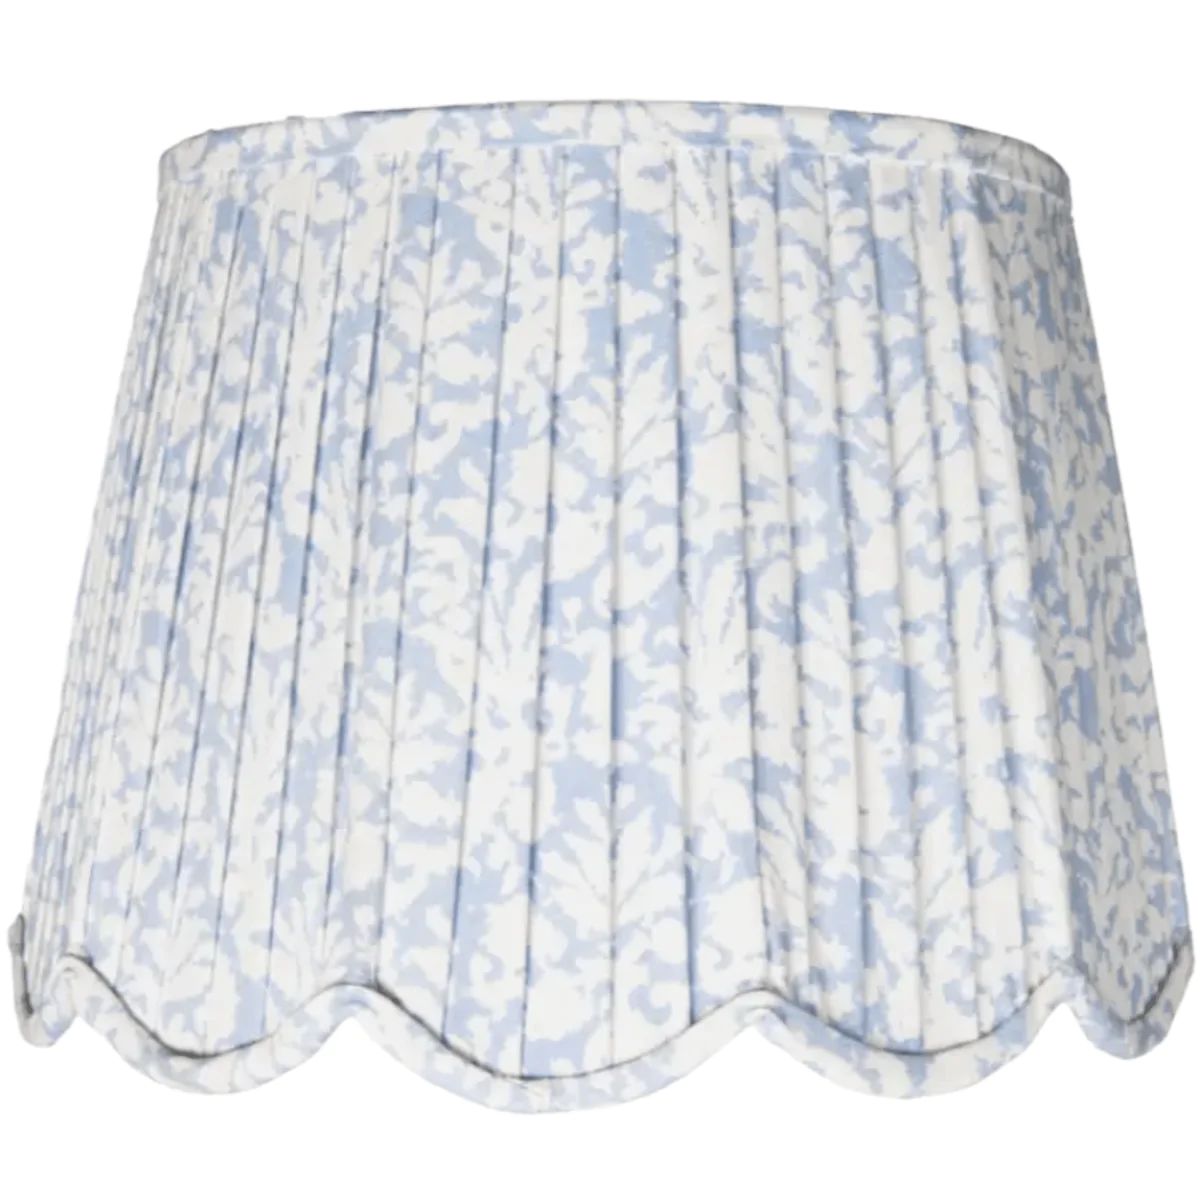 Soft Blue & White Scalloped Pleated Lampshade | The Well Appointed House, LLC